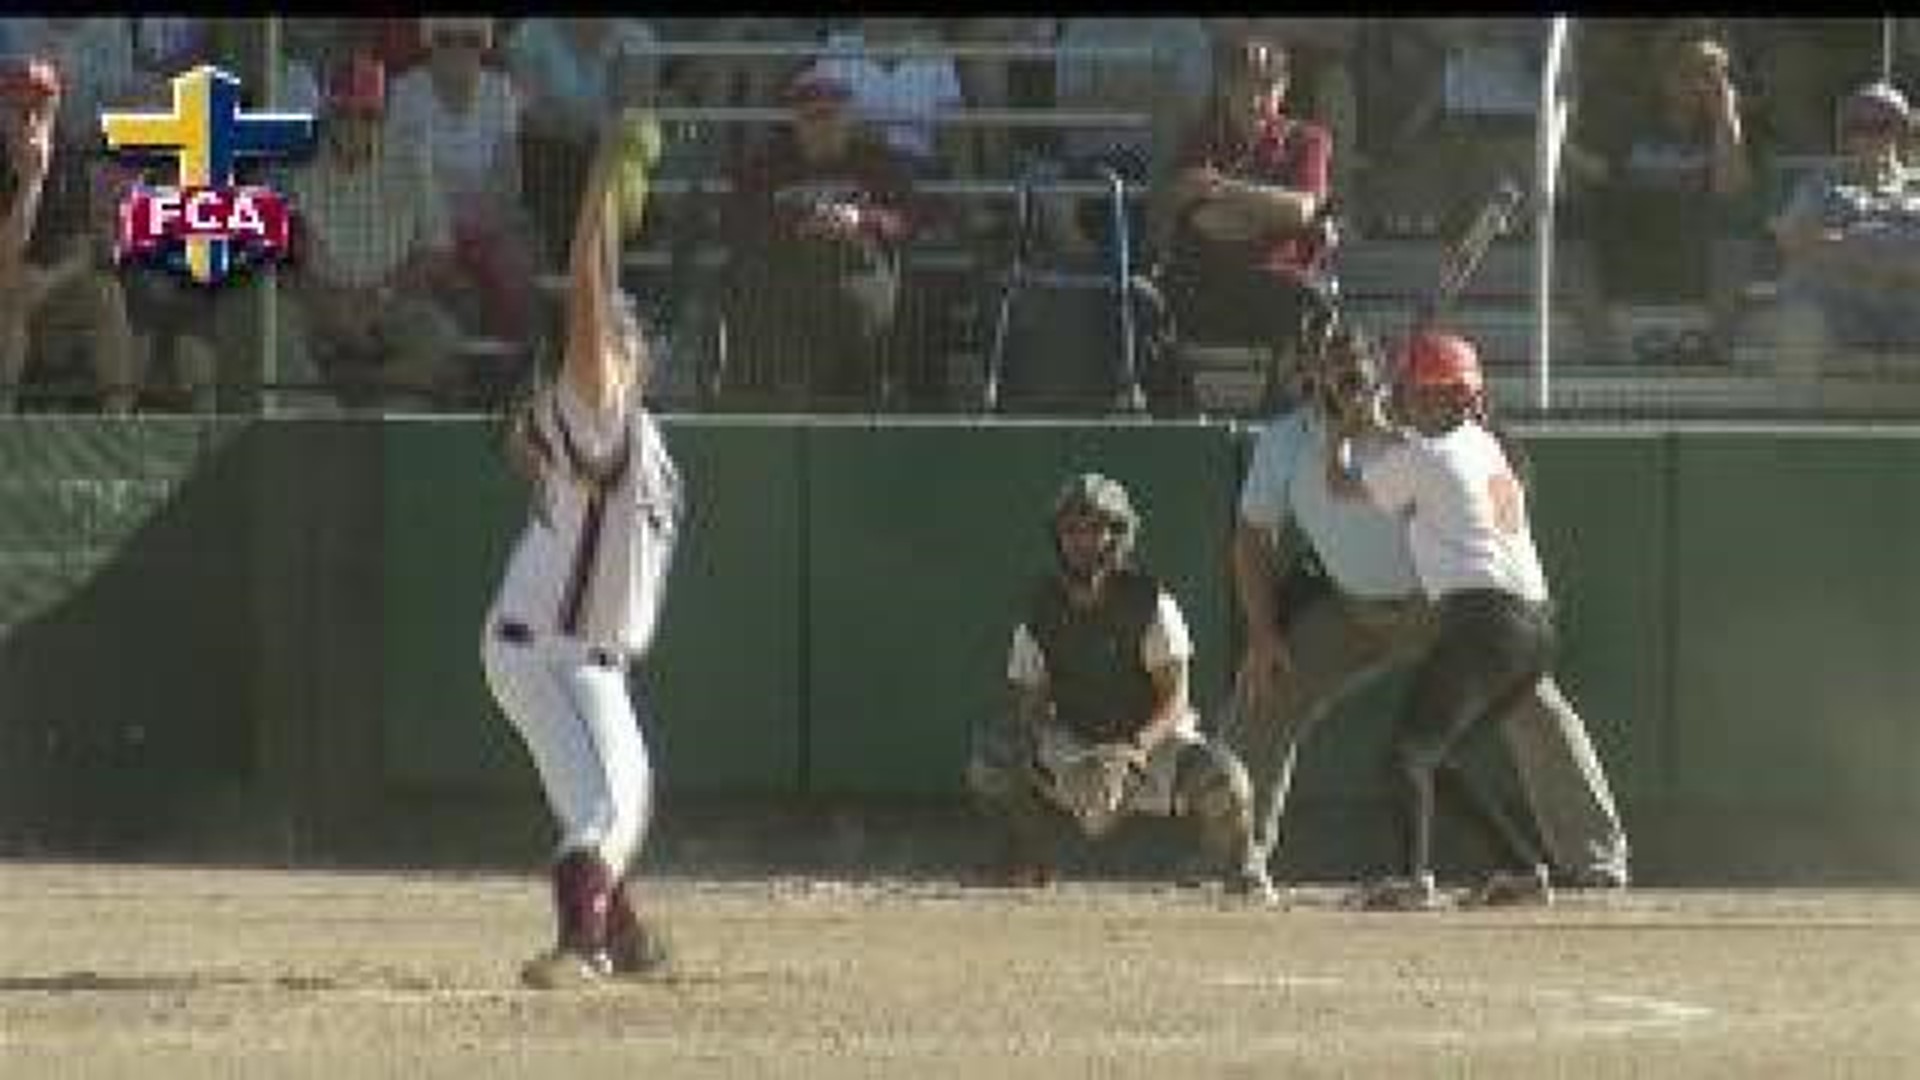 Local teams got 1 for 3 in Sectional softball